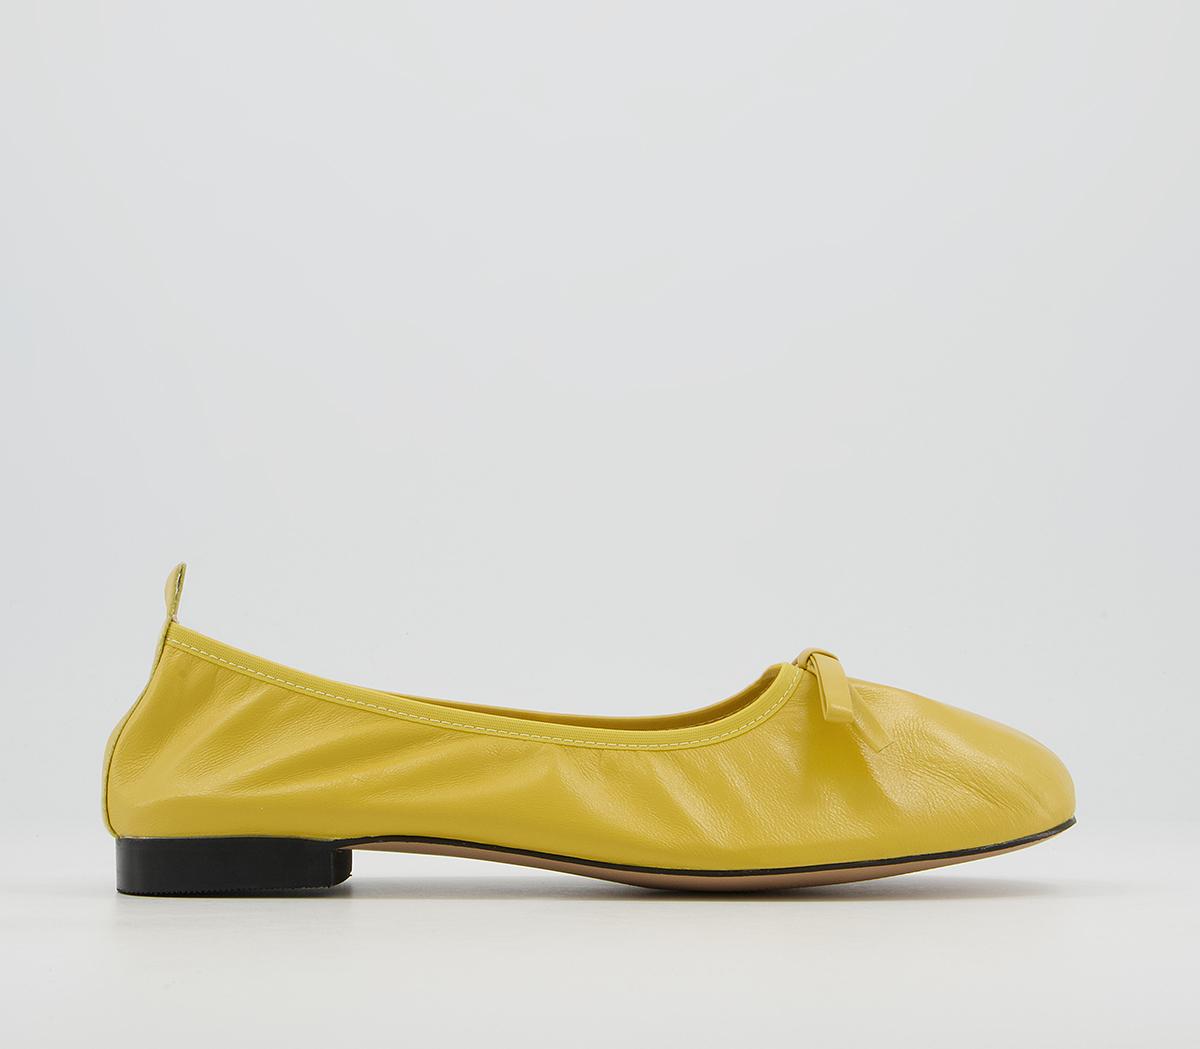 OfficeForefront Soft Unlined Ballet PumpsSoft Yellow Leather